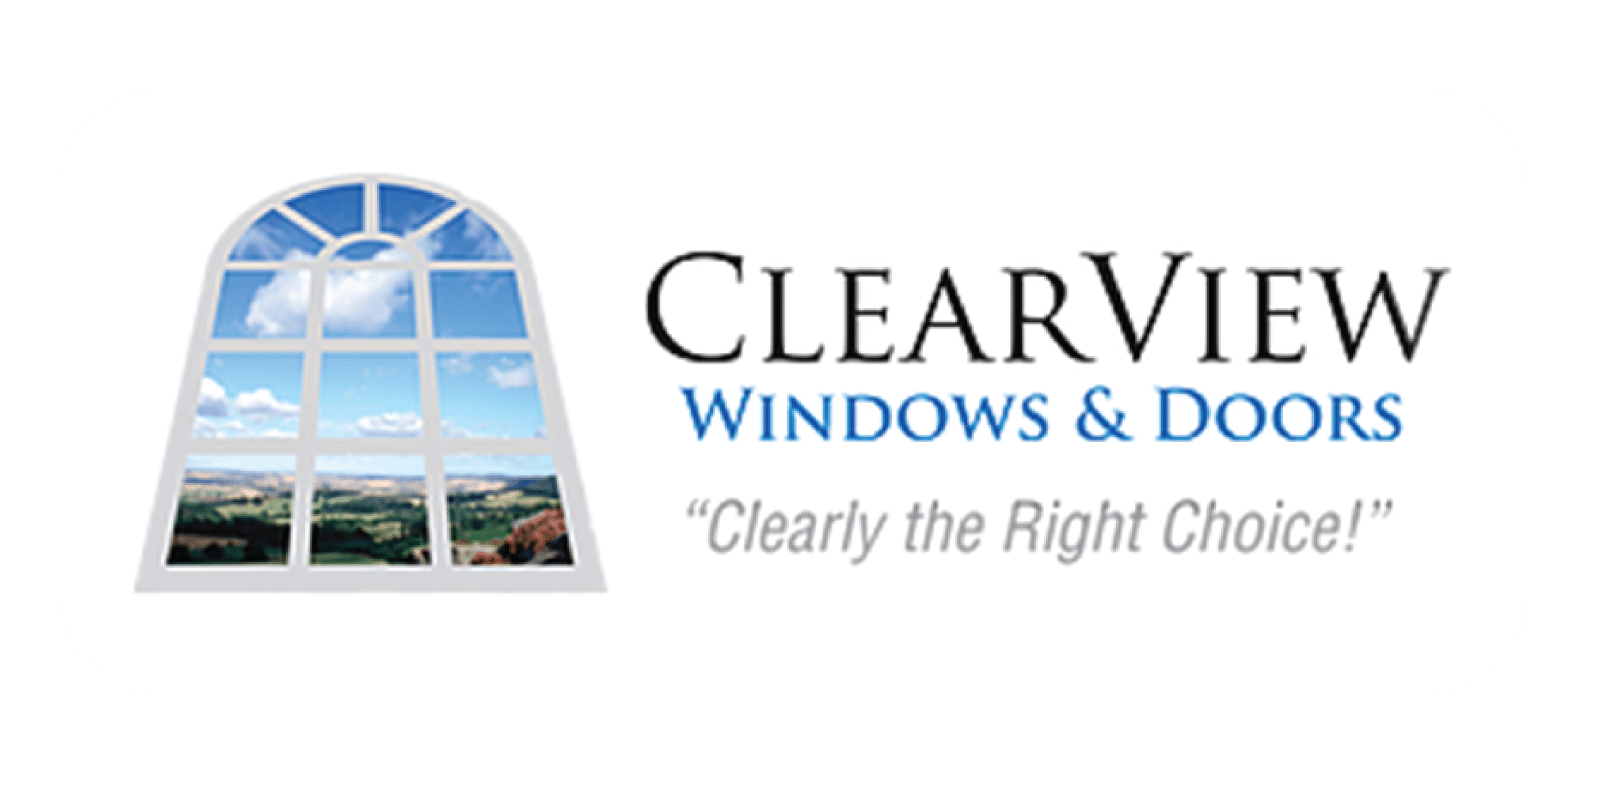 page 1 club, the gratzi, clearview windows & doors